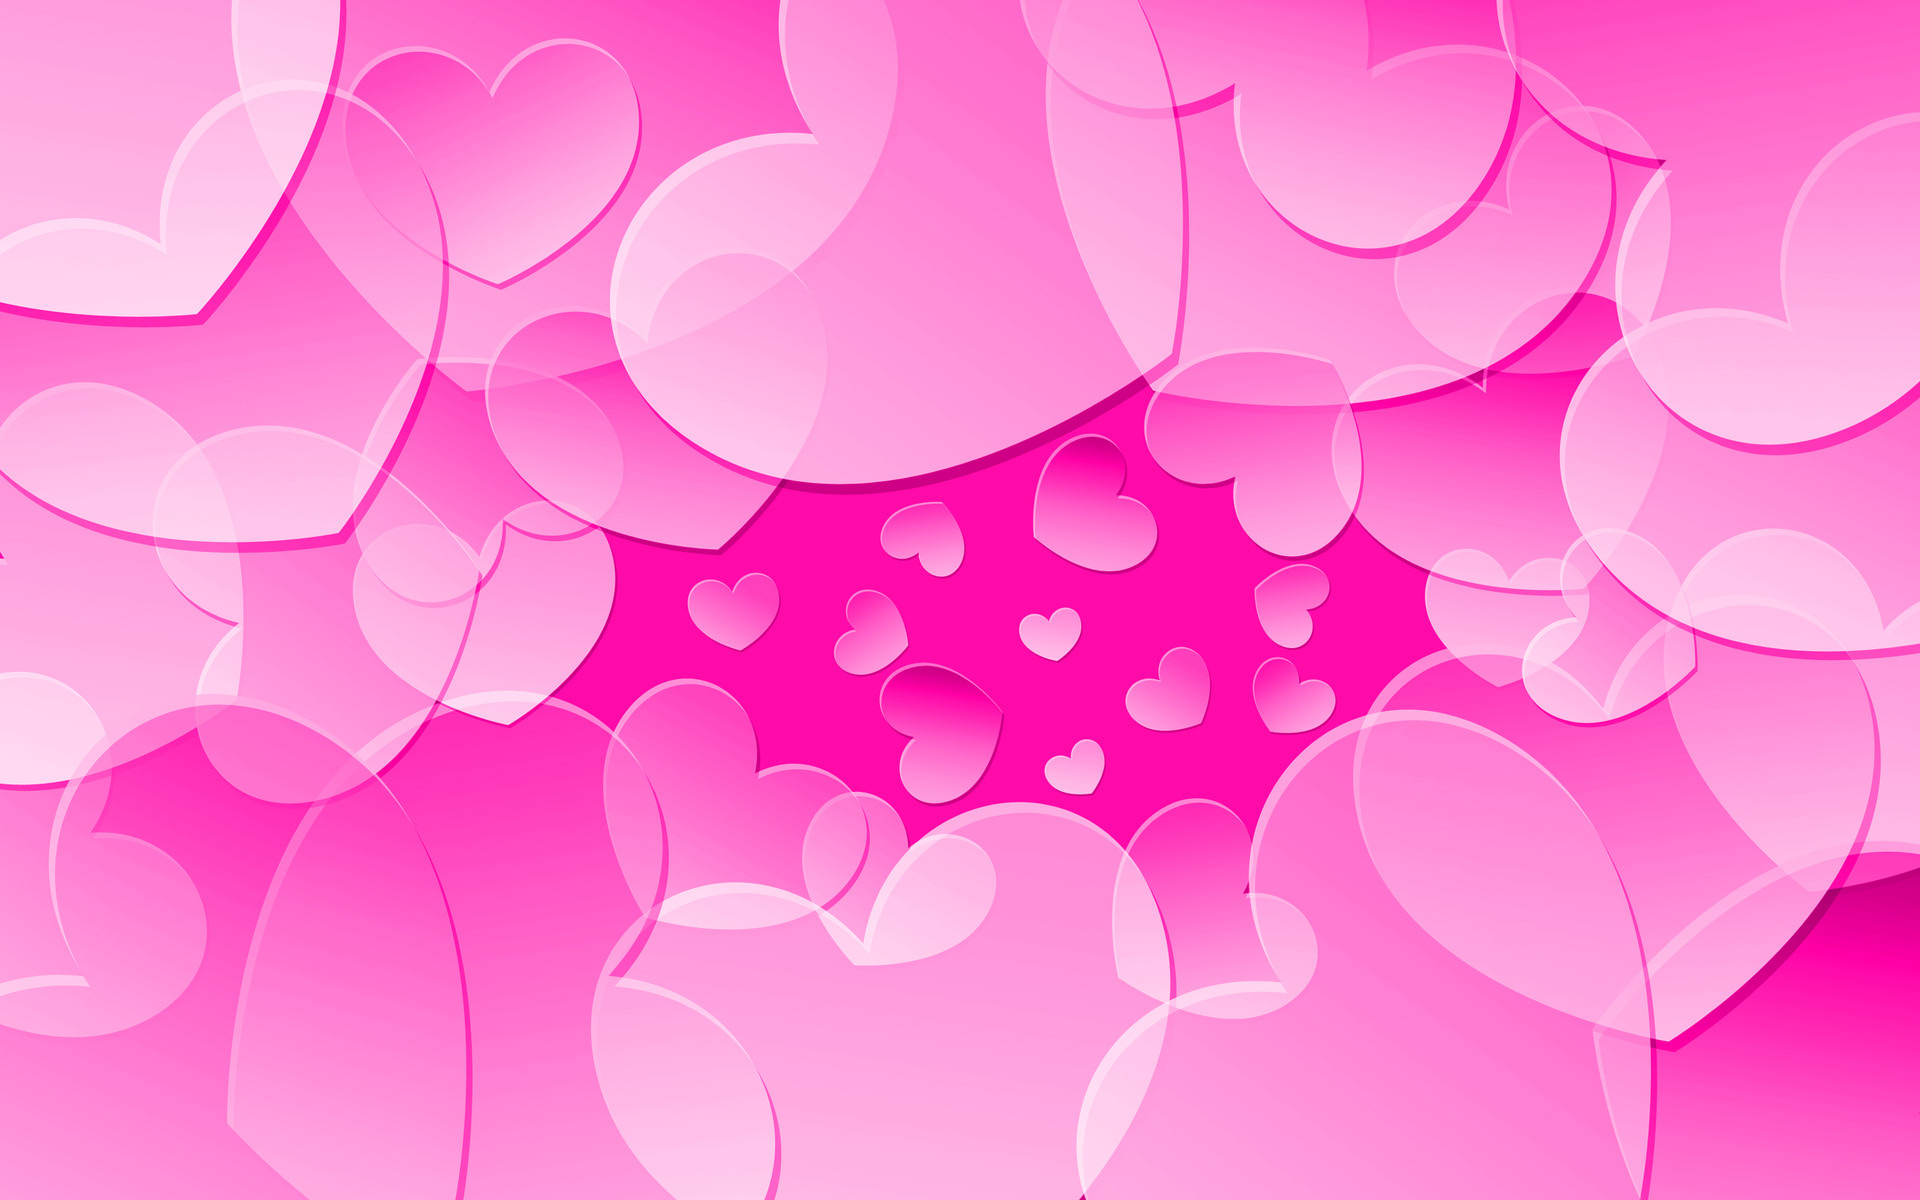 Heart Background free download | Wallpapers, Backgrounds, Images ...